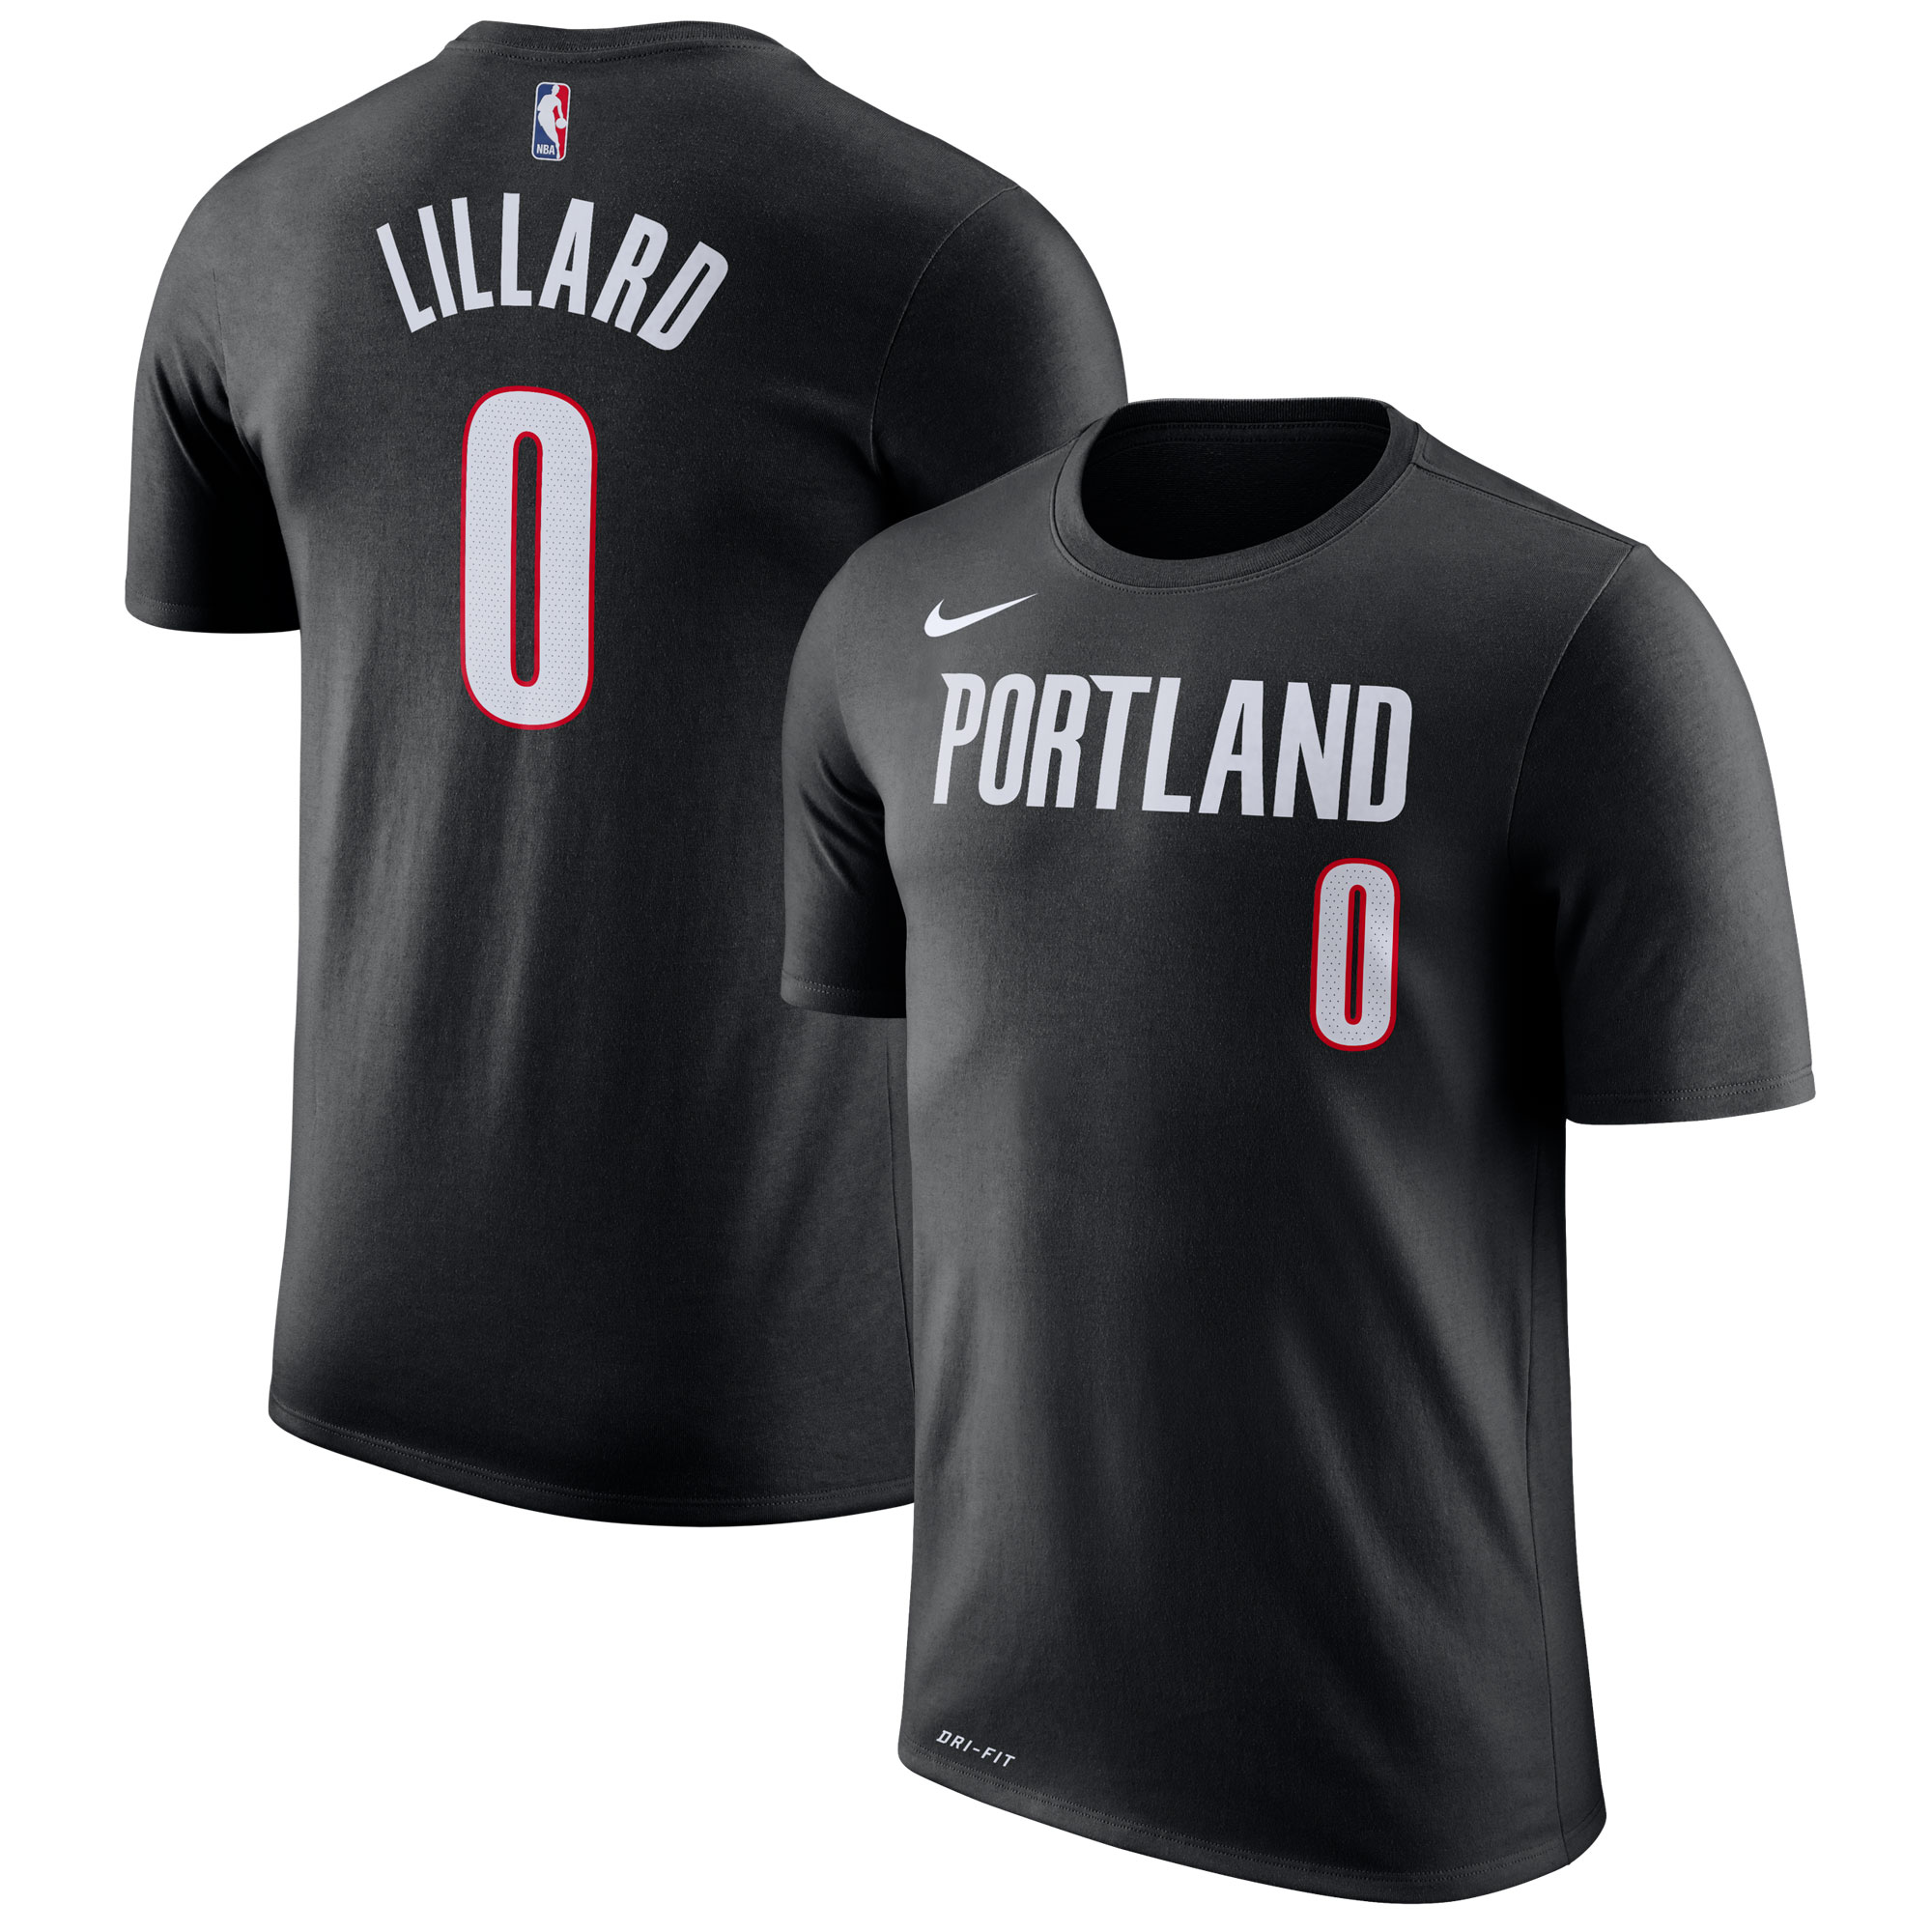 rip city youth jersey